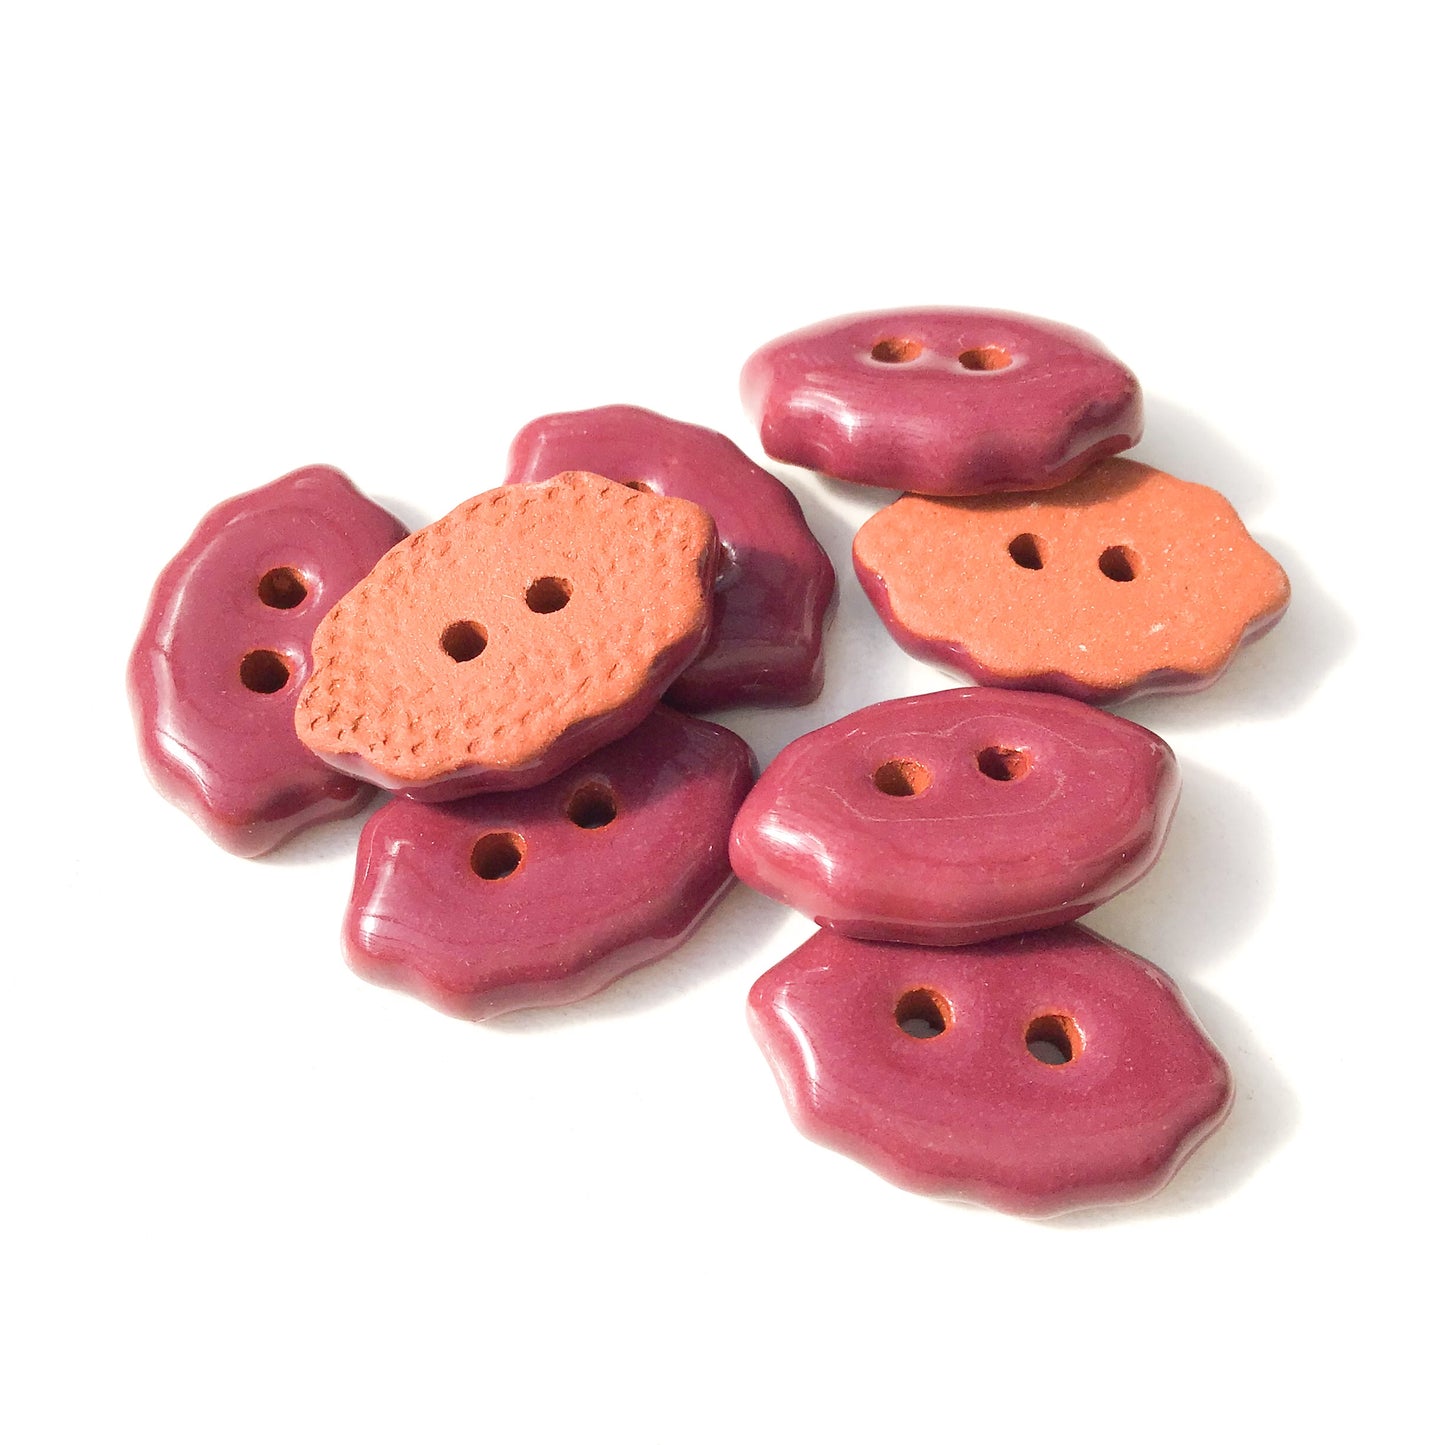 Burgundy Oval Clay Buttons - Wine Colored Clay Buttons - 1/2" x 3/4" - 8 Pack